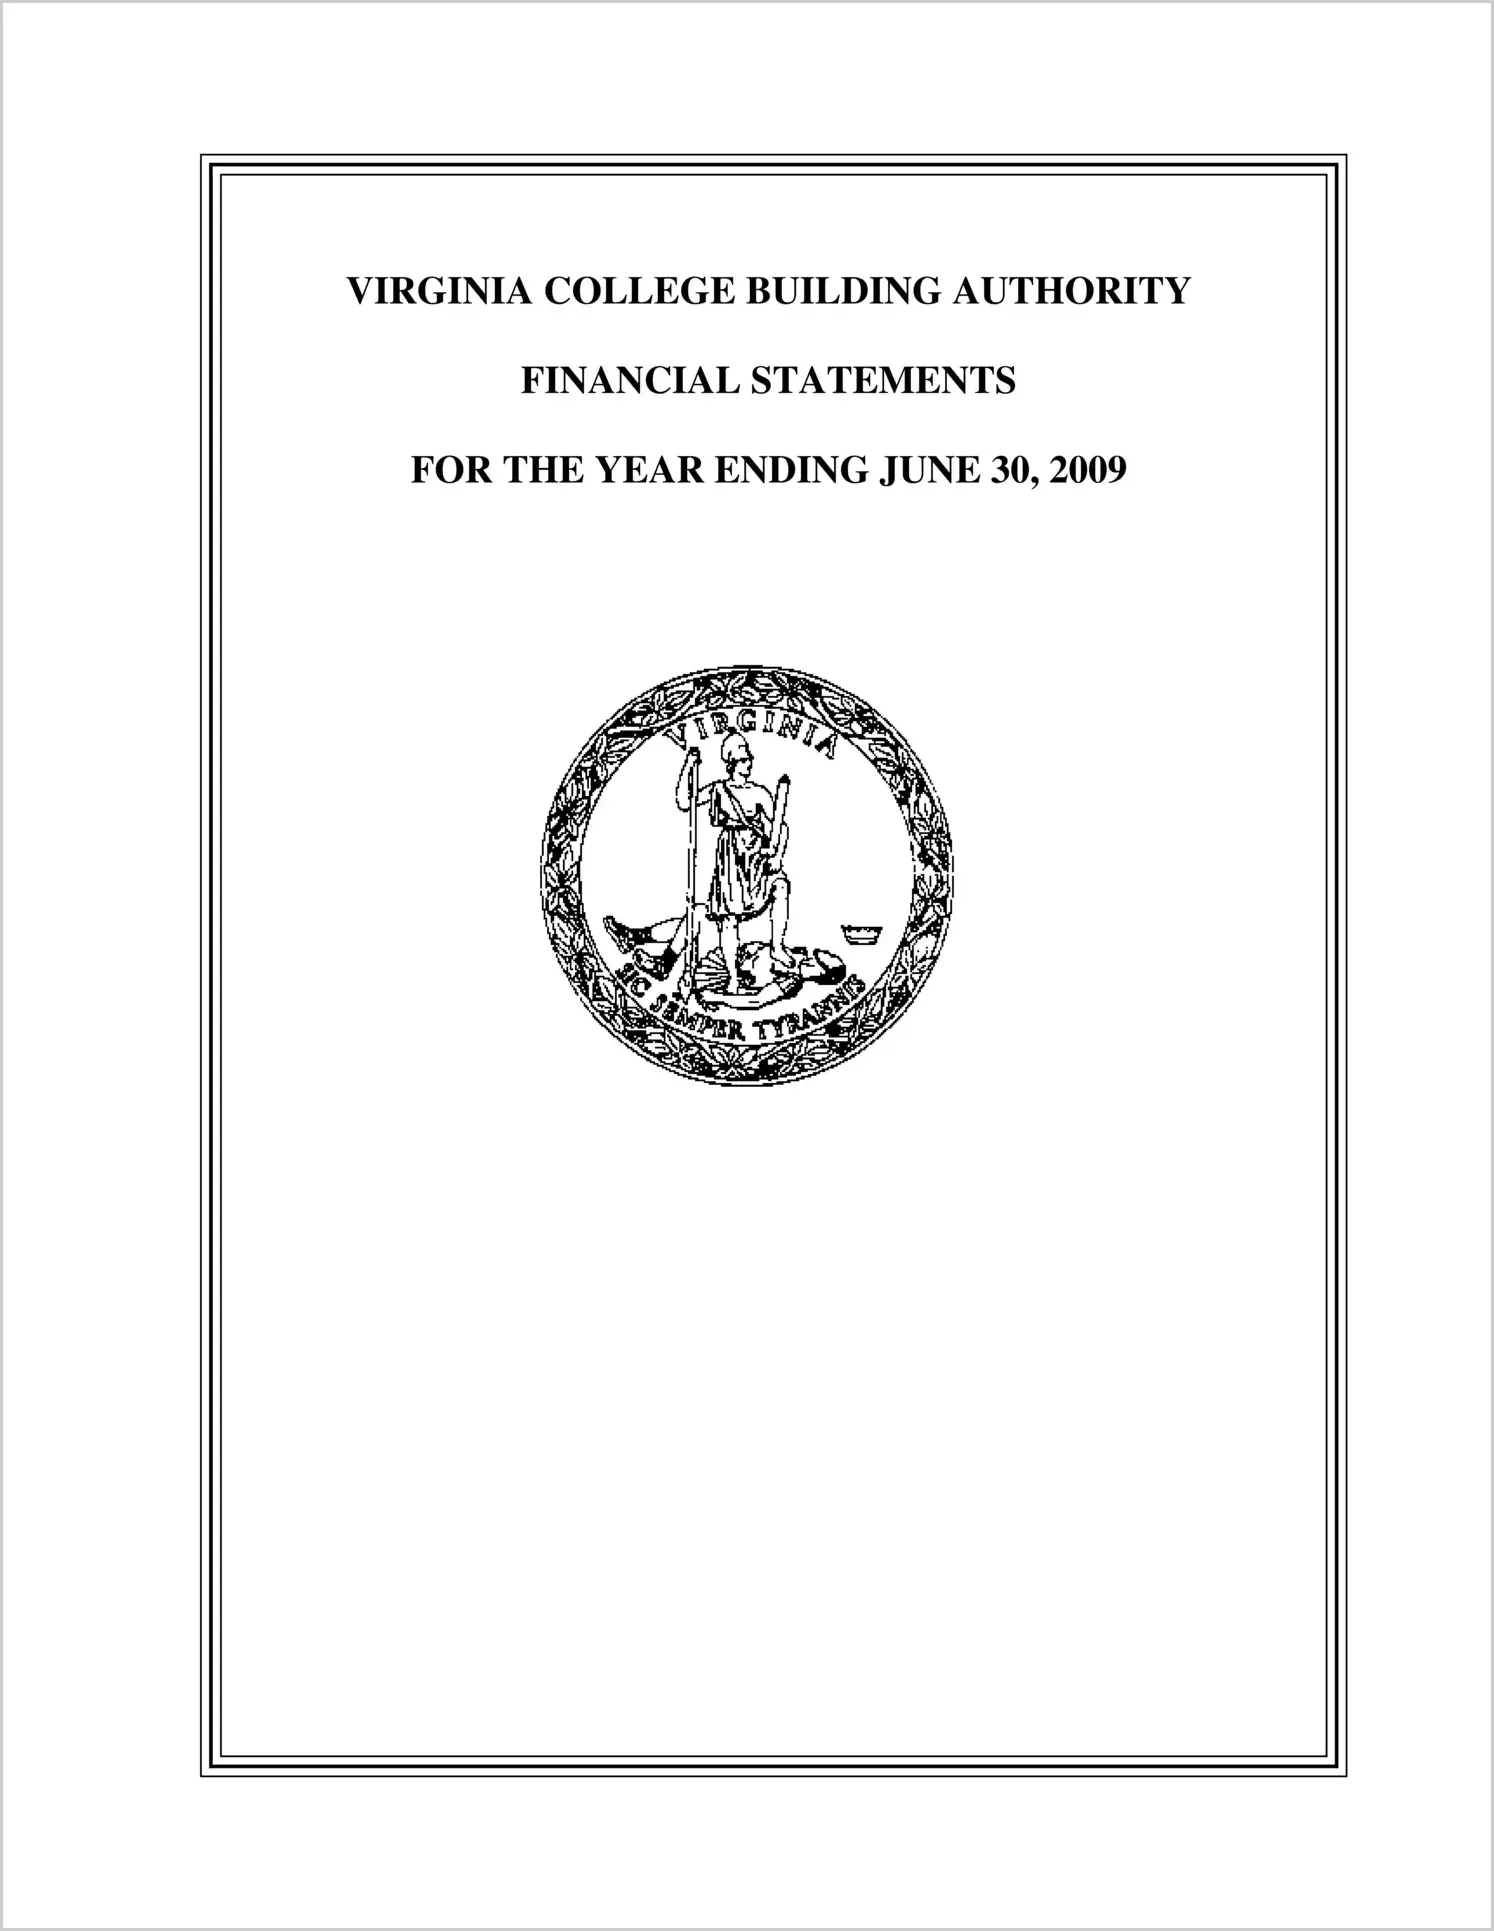 Virginia College Building Authority for the year ended June 30, 2009